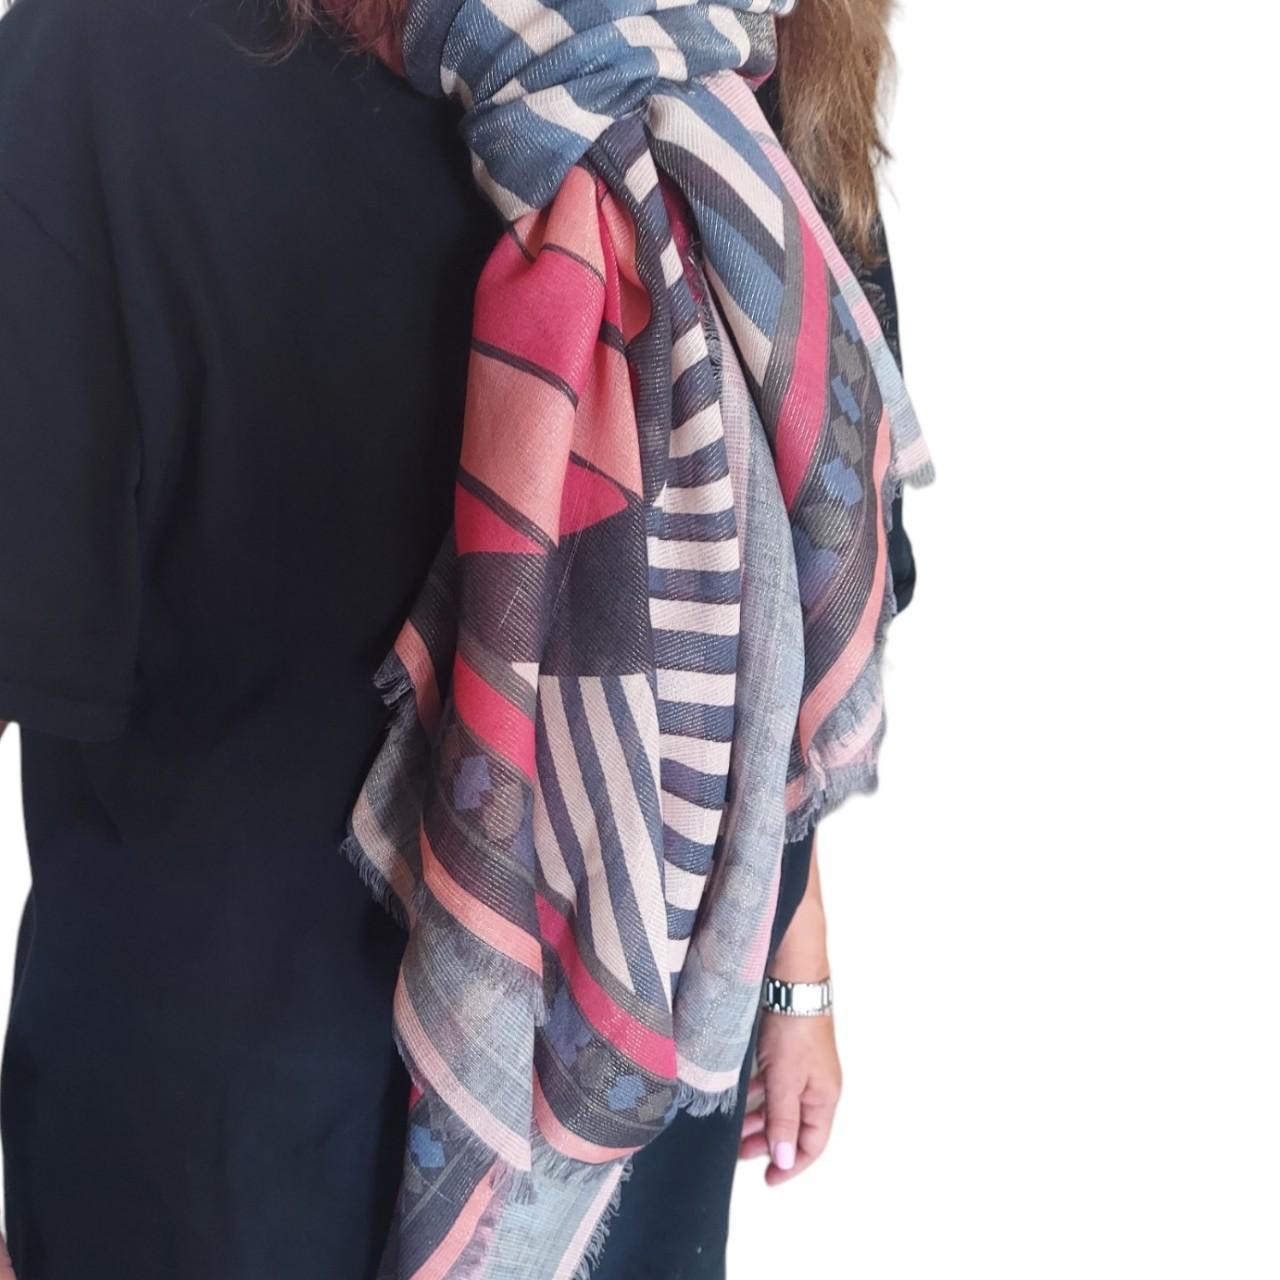 Emilio Pucci Women's Grey and Pink Scarf-wraps (4)